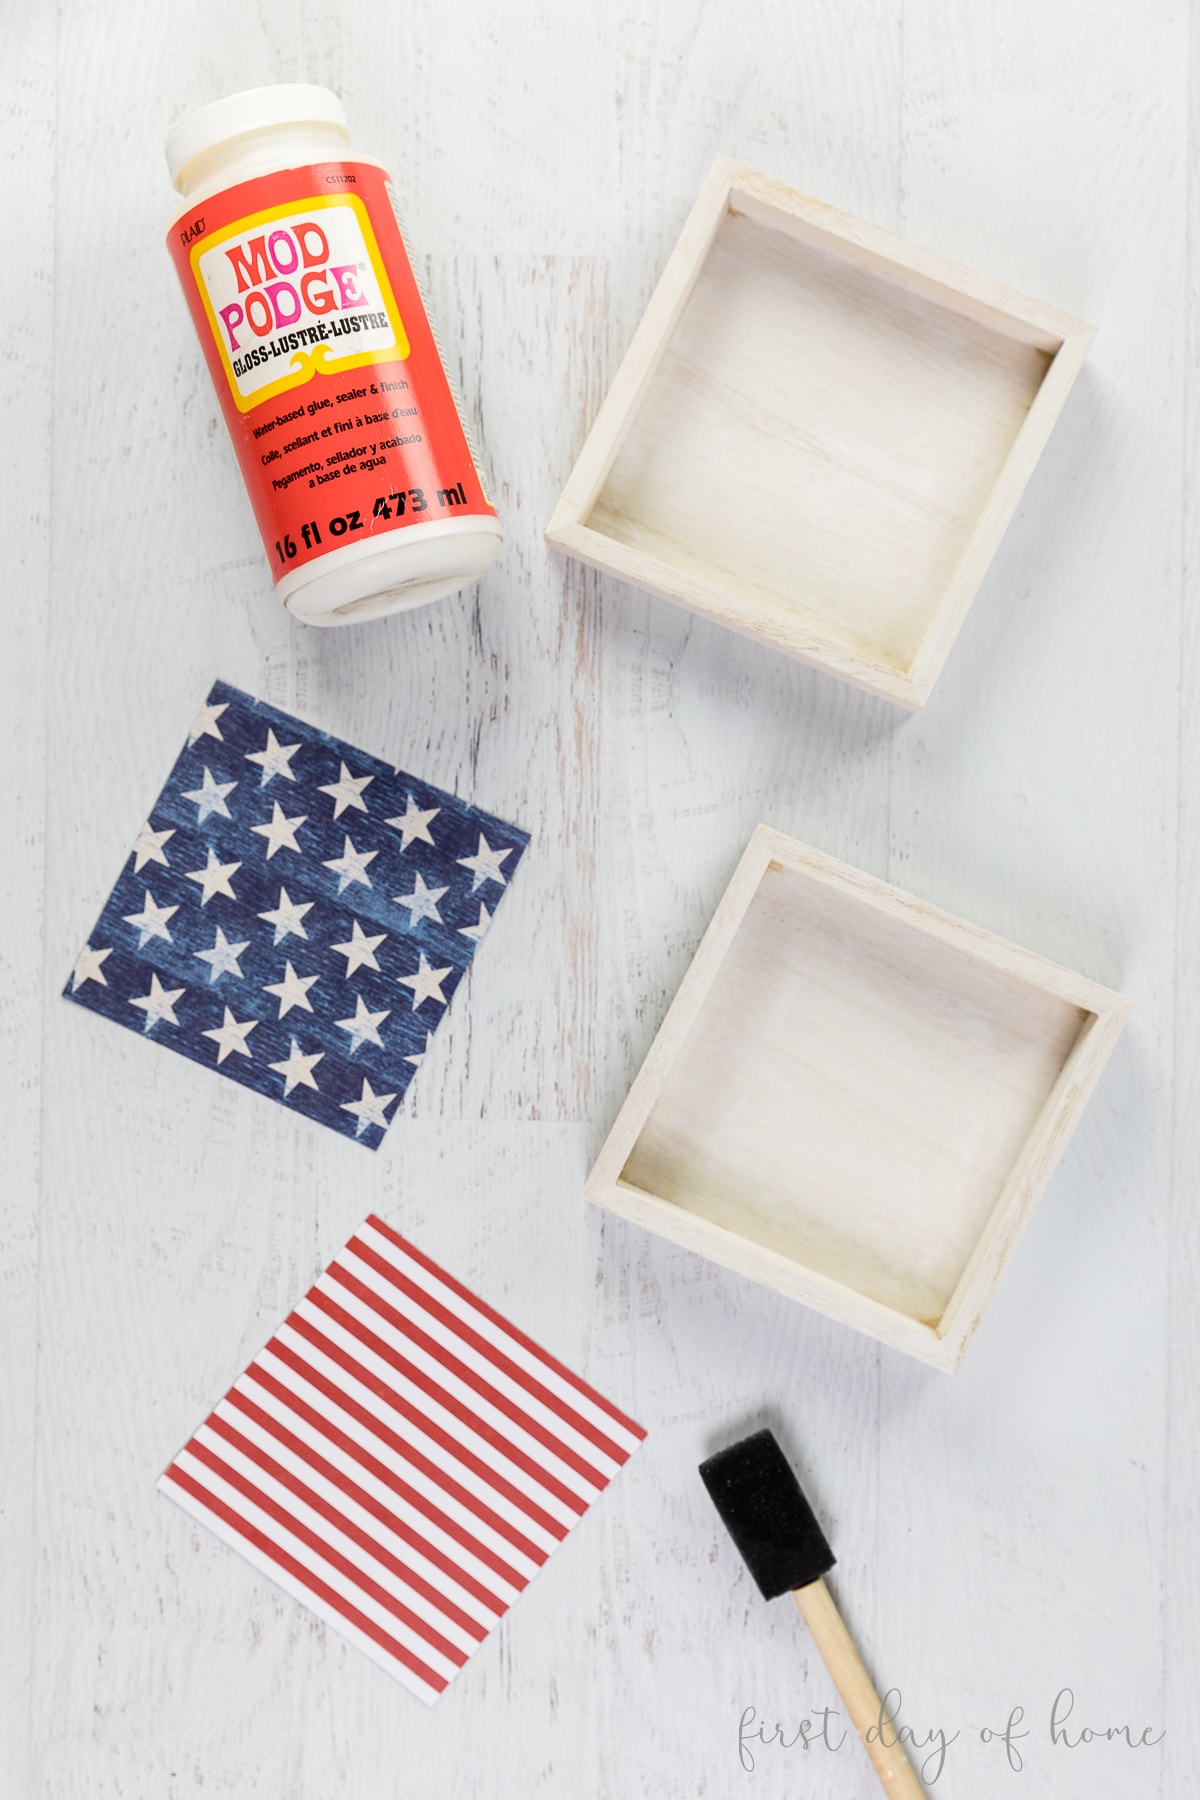 Applying Mod Podge to the wooden boxes to make patriotic wood signs